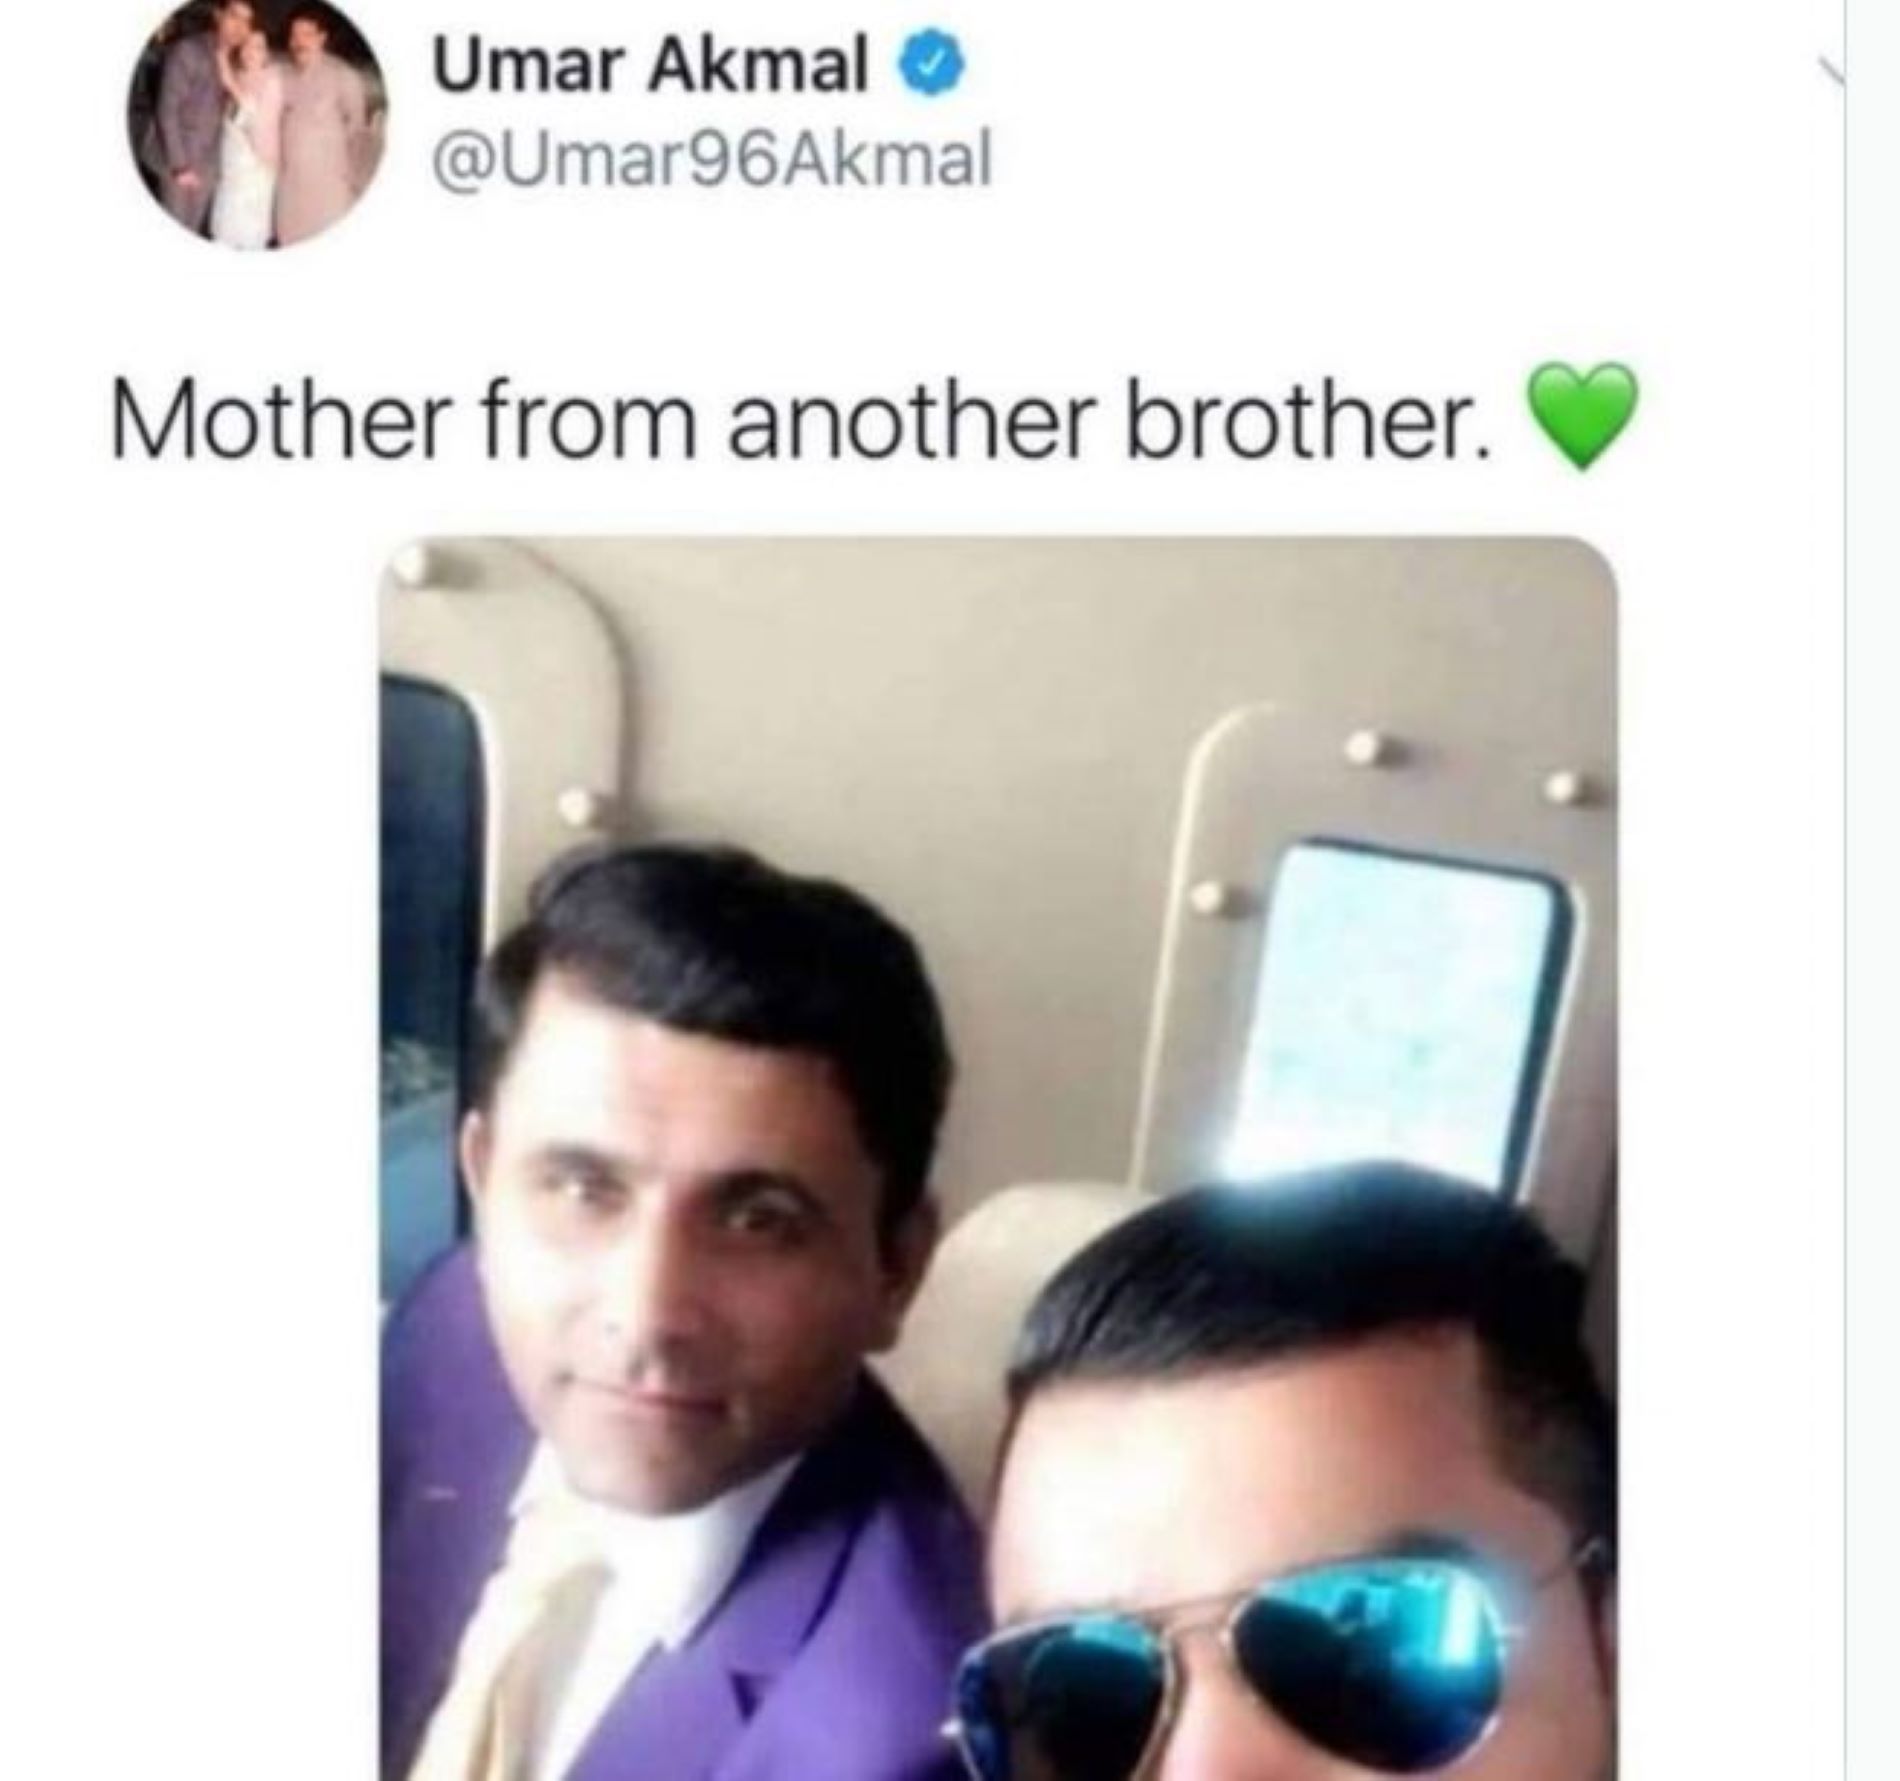 Umar Akmal has been notorious for his accidentally funny Tweets.